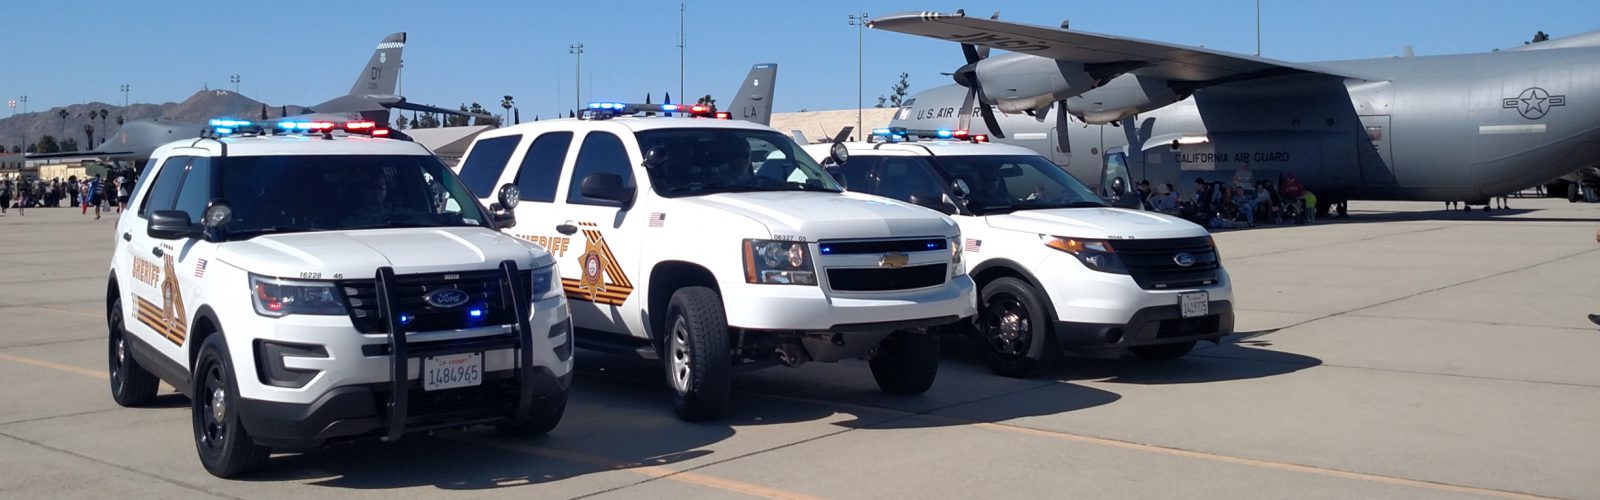 Three SB County Sheriffs Department cars with Planes on runway